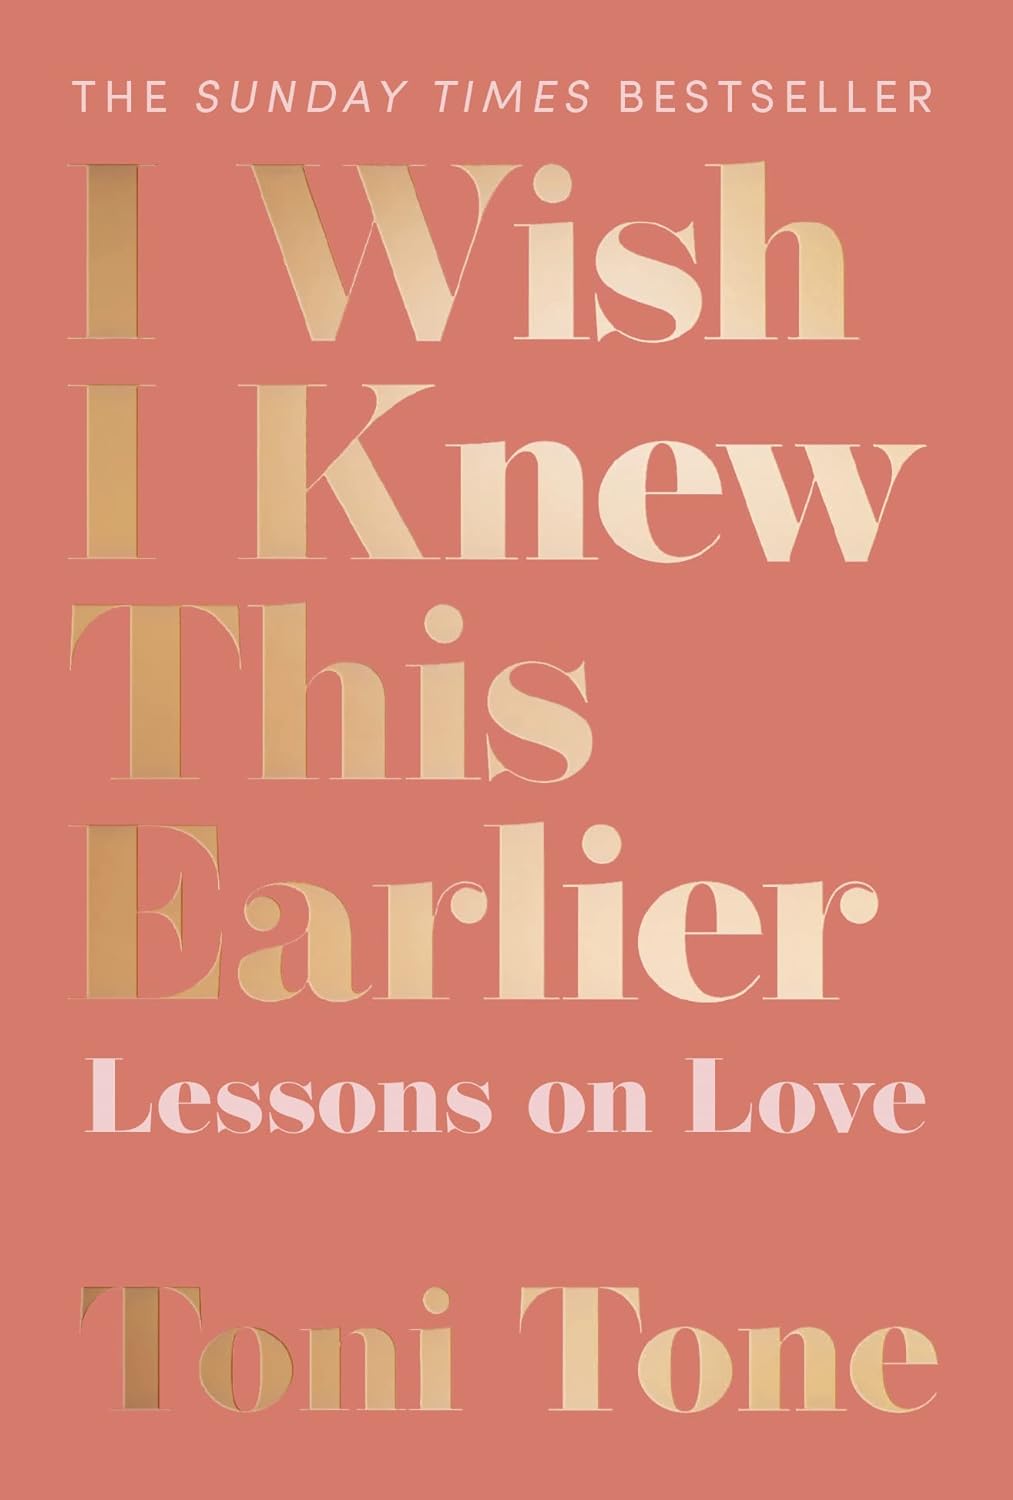 I wish i knew this earlier :  lessons on love